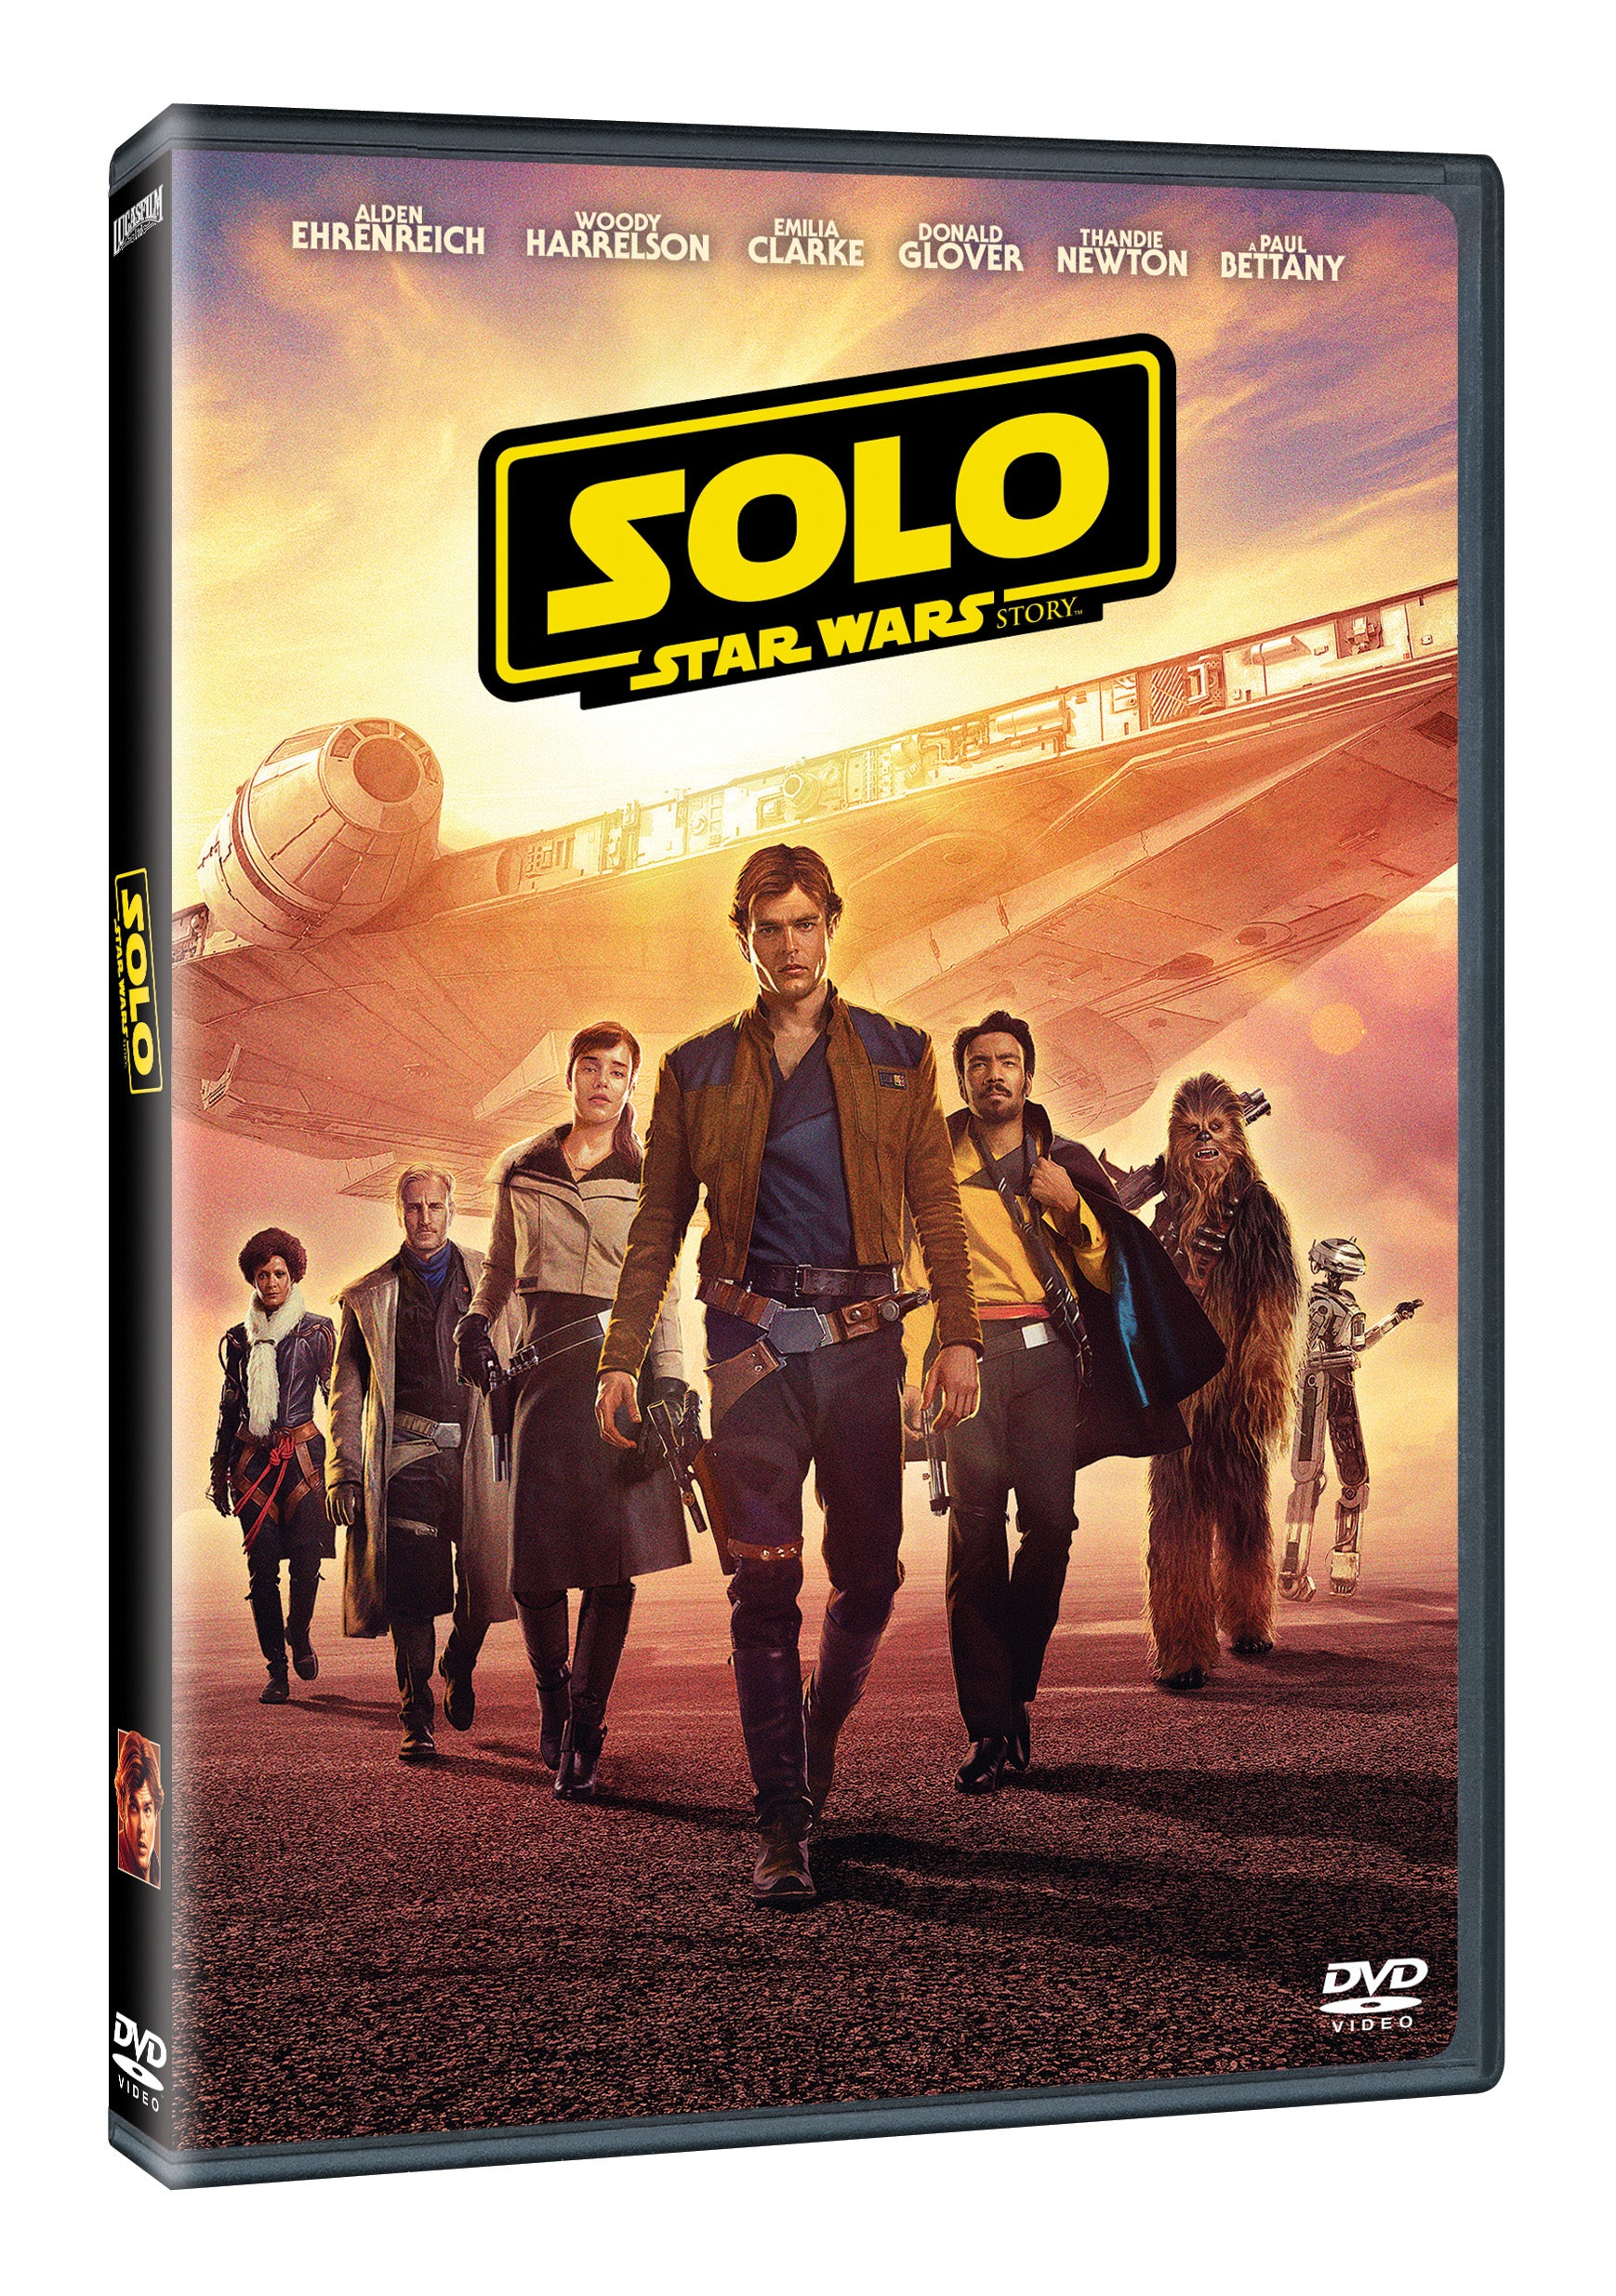 Solo: Star Wars Story DVD / Solo: A Star Wars Story